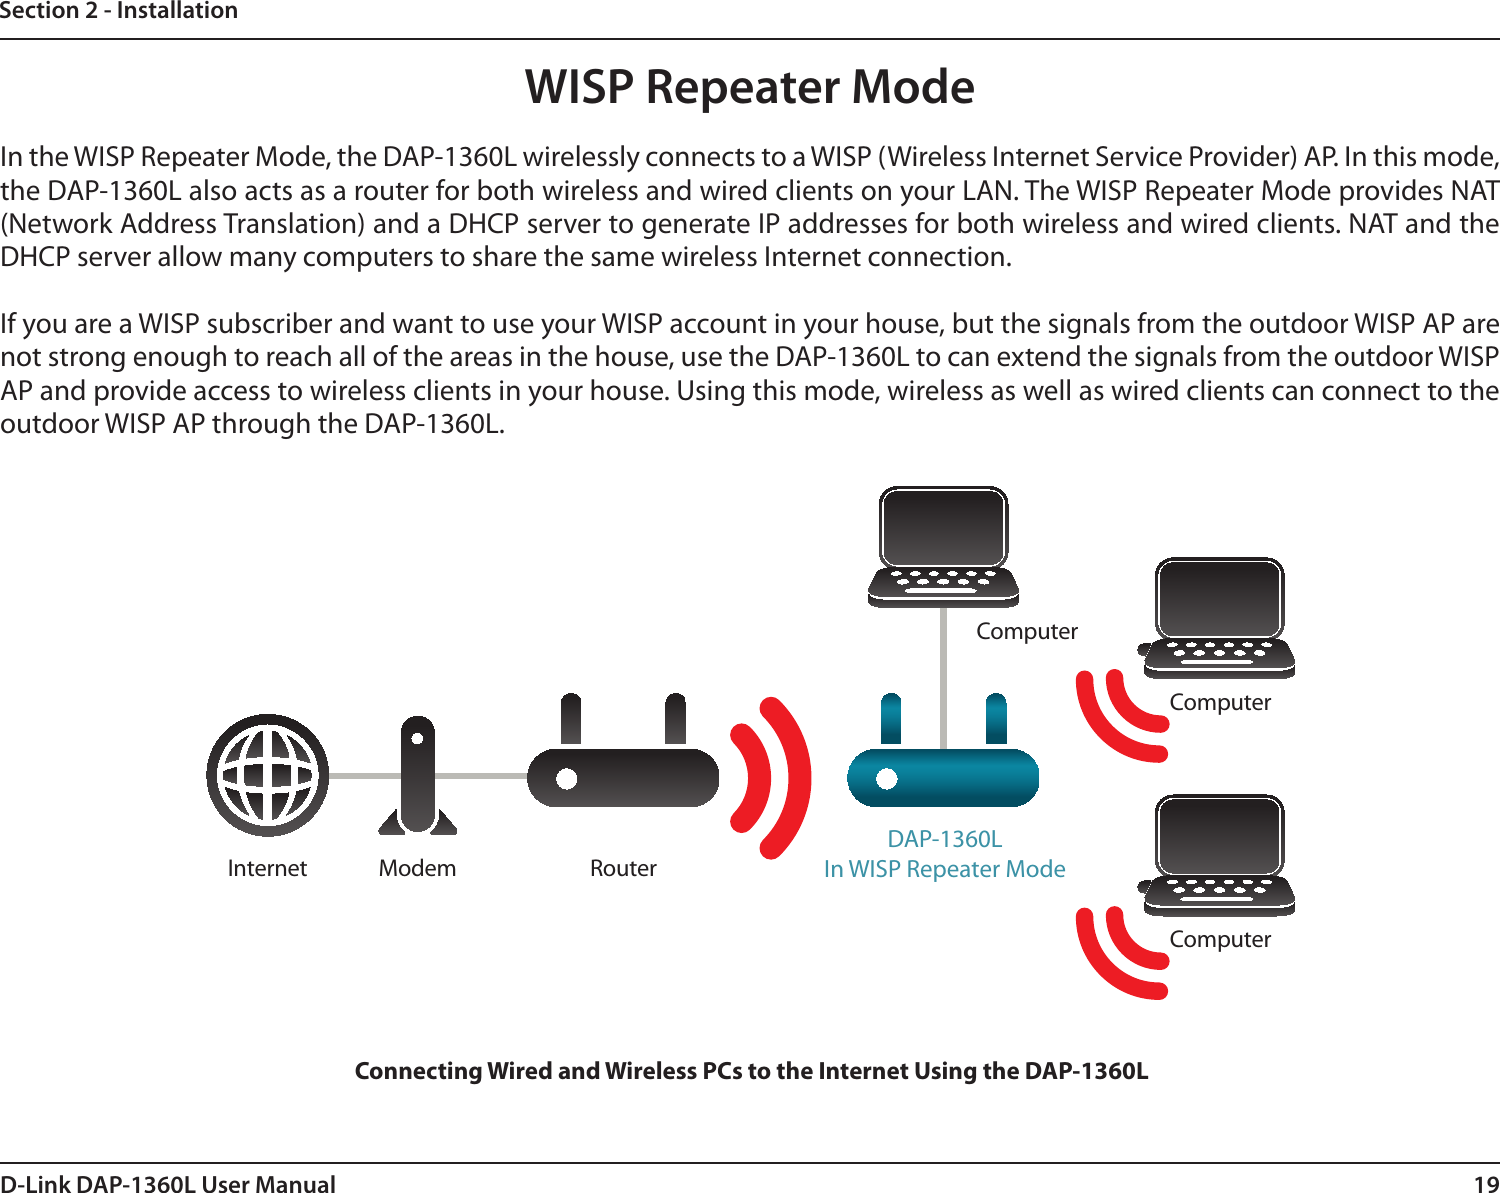 19D-Link DAP-1360L User ManualSection 2 - InstallationWISP Repeater ModeIn the WISP Repeater Mode, the DAP-1360L wirelessly connects to a WISP (Wireless Internet Service Provider) AP. In this mode, the DAP-1360L also acts as a router for both wireless and wired clients on your LAN. The WISP Repeater Mode provides NAT (Network Address Translation) and a DHCP server to generate IP addresses for both wireless and wired clients. NAT and the DHCP server allow many computers to share the same wireless Internet connection.If you are a WISP subscriber and want to use your WISP account in your house, but the signals from the outdoor WISP AP are not strong enough to reach all of the areas in the house, use the DAP-1360L to can extend the signals from the outdoor WISP AP and provide access to wireless clients in your house. Using this mode, wireless as well as wired clients can connect to the outdoor WISP AP through the DAP-1360L.ComputerInternet Modem RouterComputerComputerConnecting Wired and Wireless PCs to the Internet Using the DAP-1360LDAP-1360LIn WISP Repeater Mode